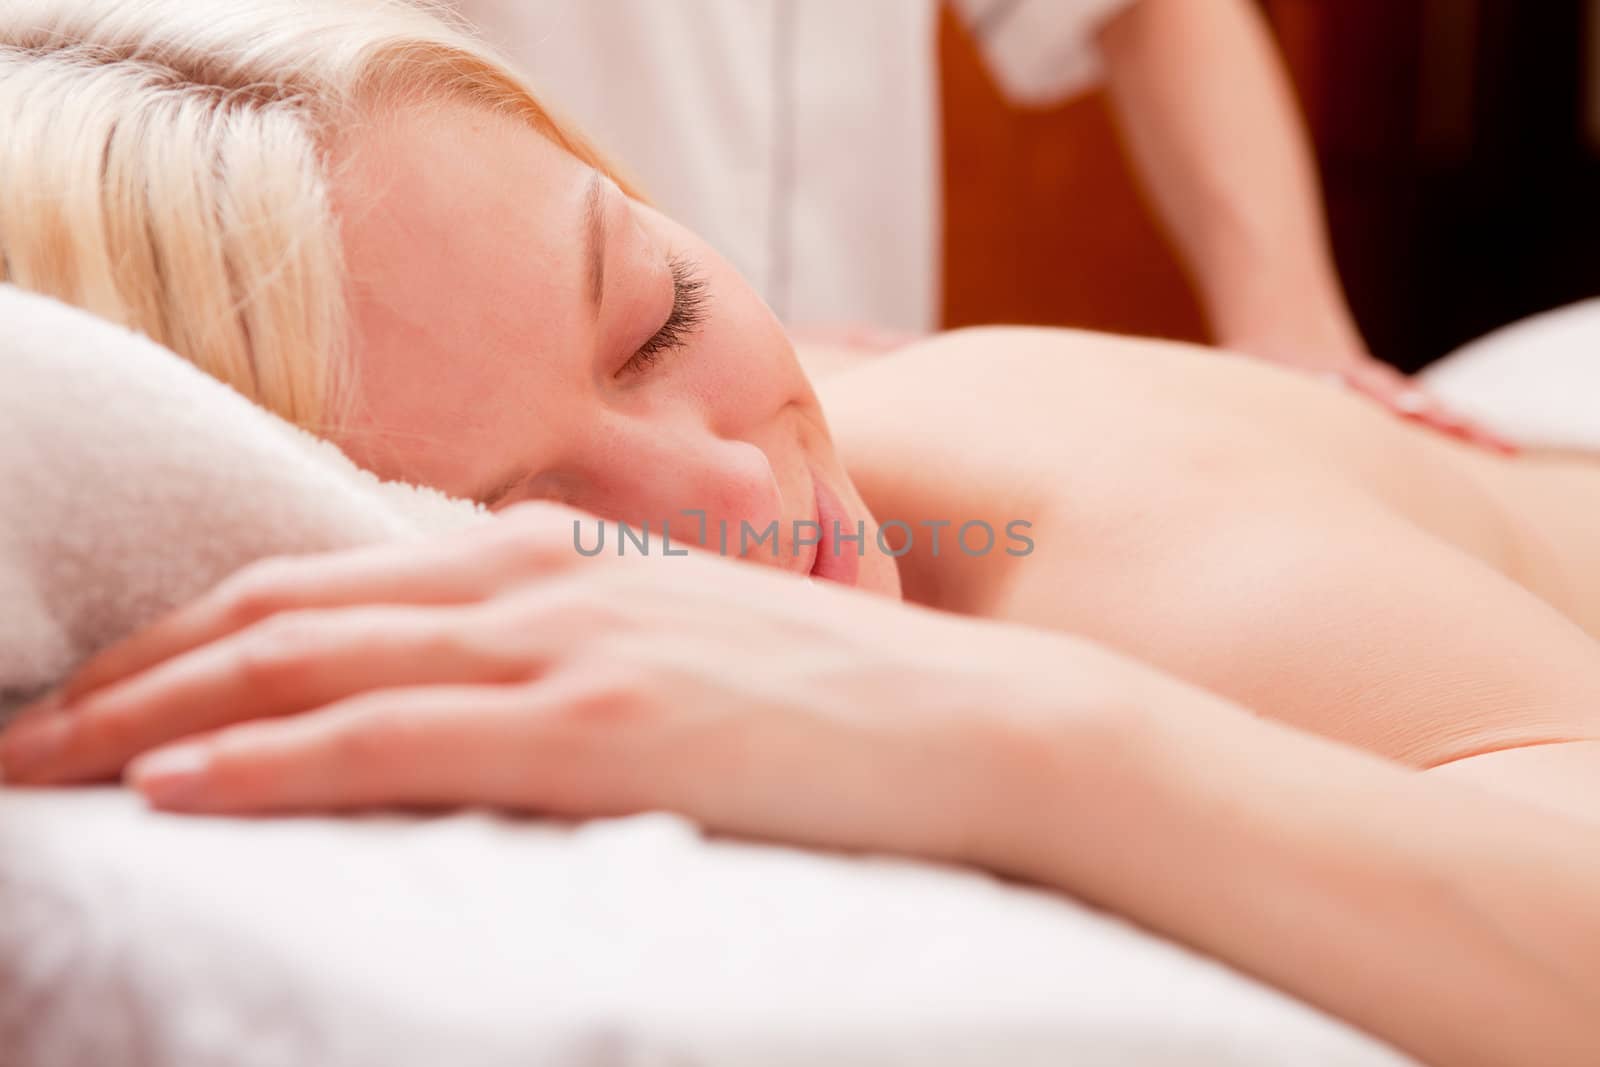 Detail of a relaxed woman receiving a back massage at a spa